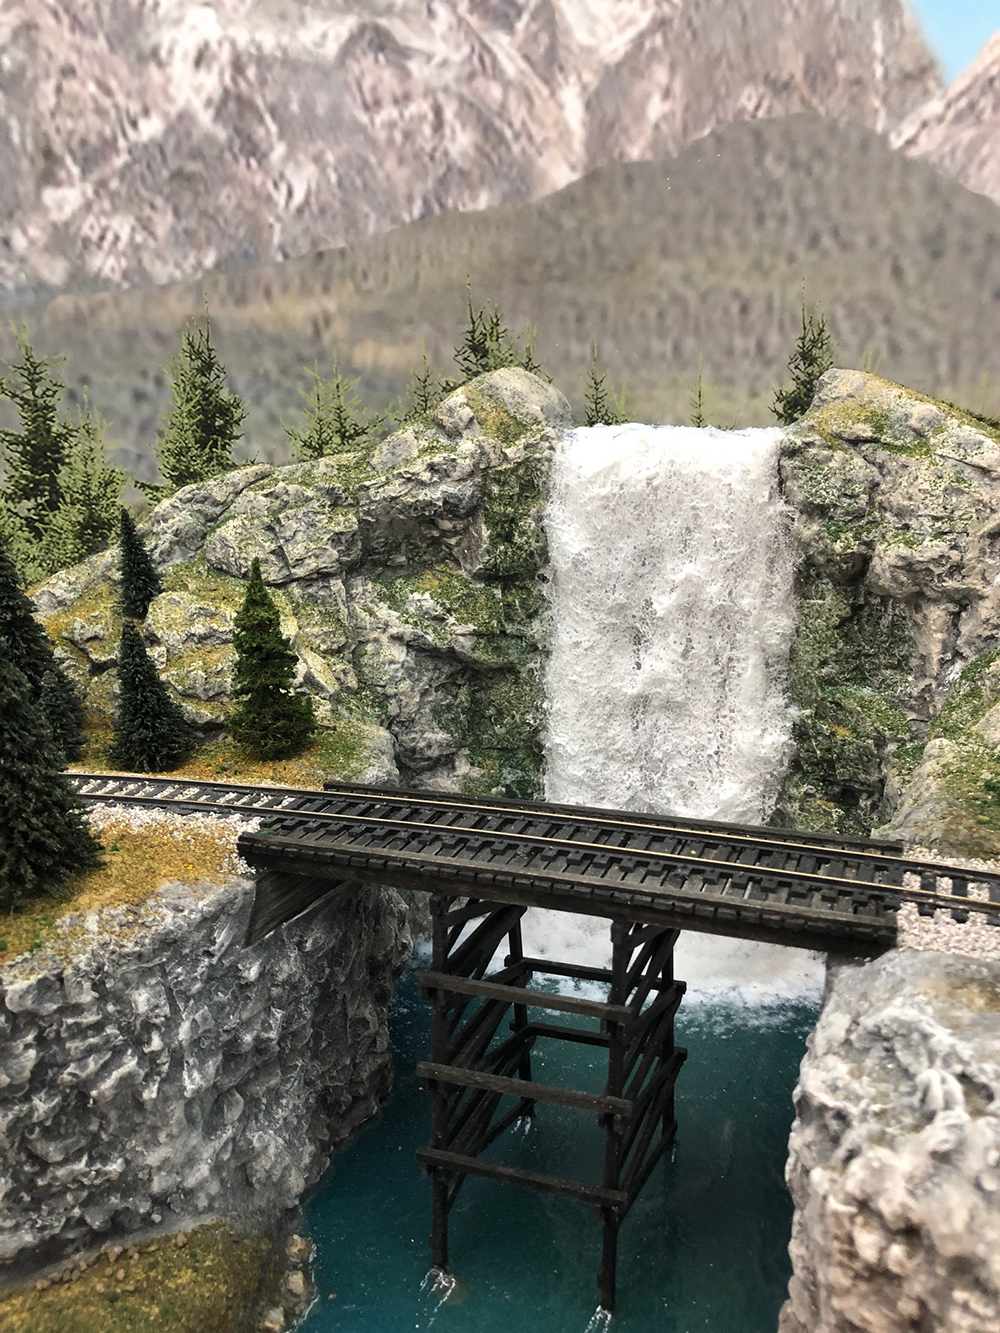 model waterfall with white water falling into a blue river that passes under a brown wooden railroad bridge